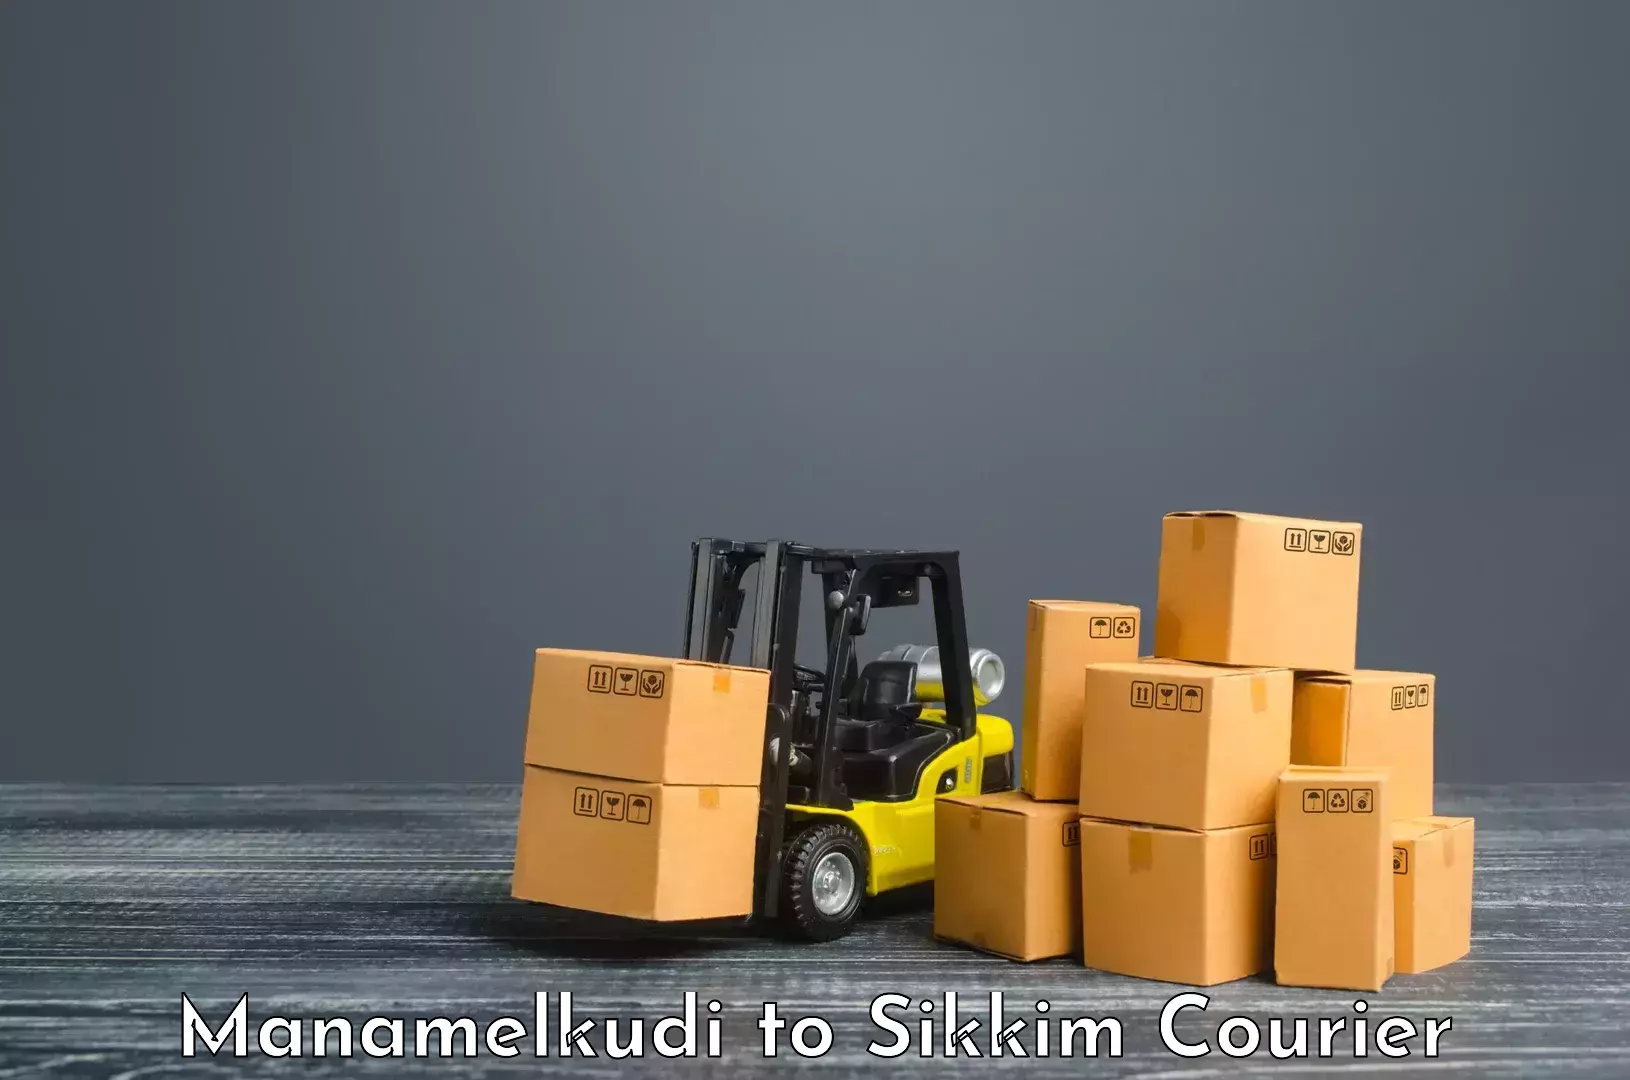 Business delivery service Manamelkudi to West Sikkim